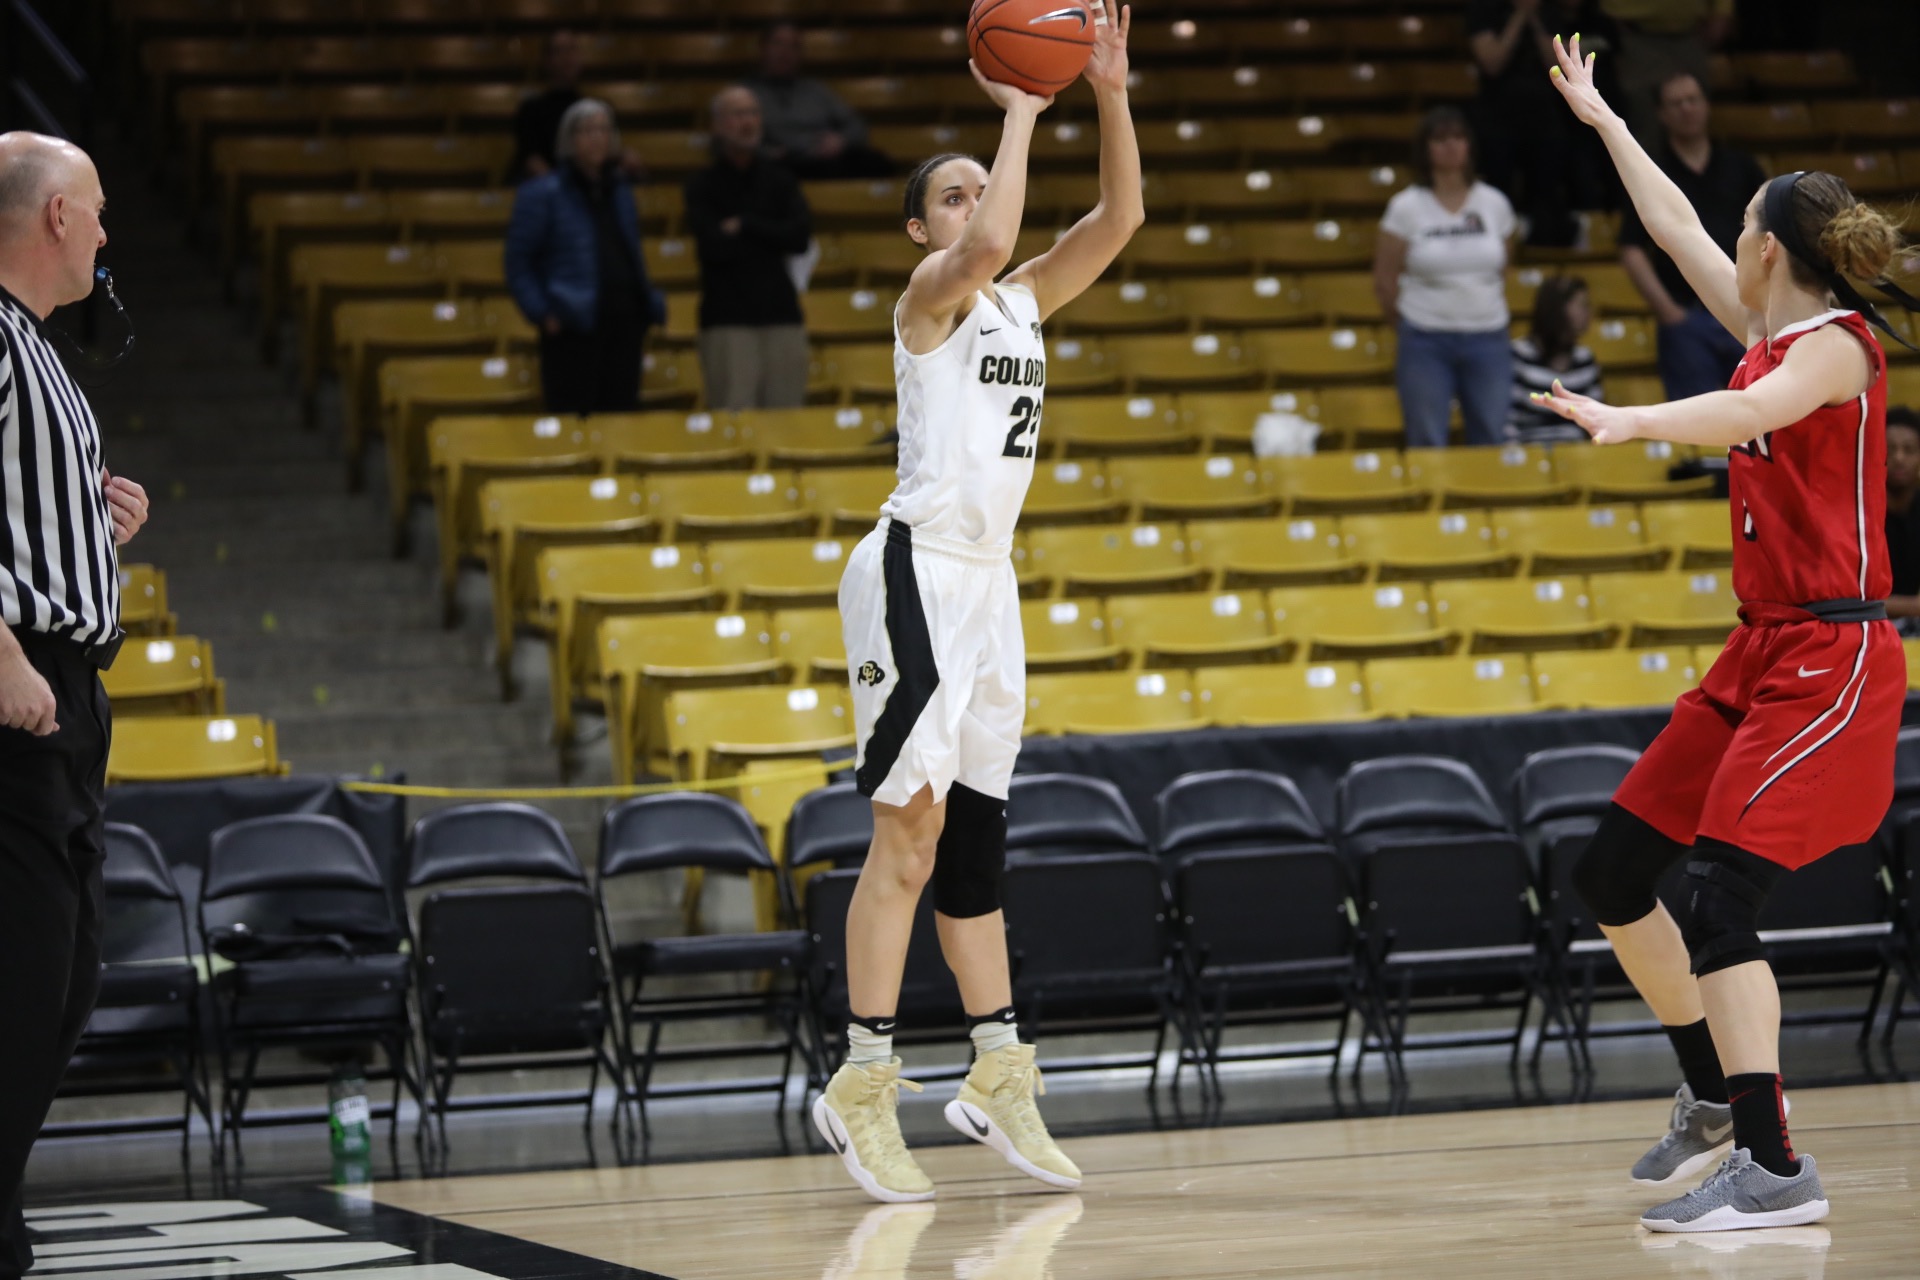 Colorado’s Haley Smith leaves behind unparalleled legacy in excellence on and off court